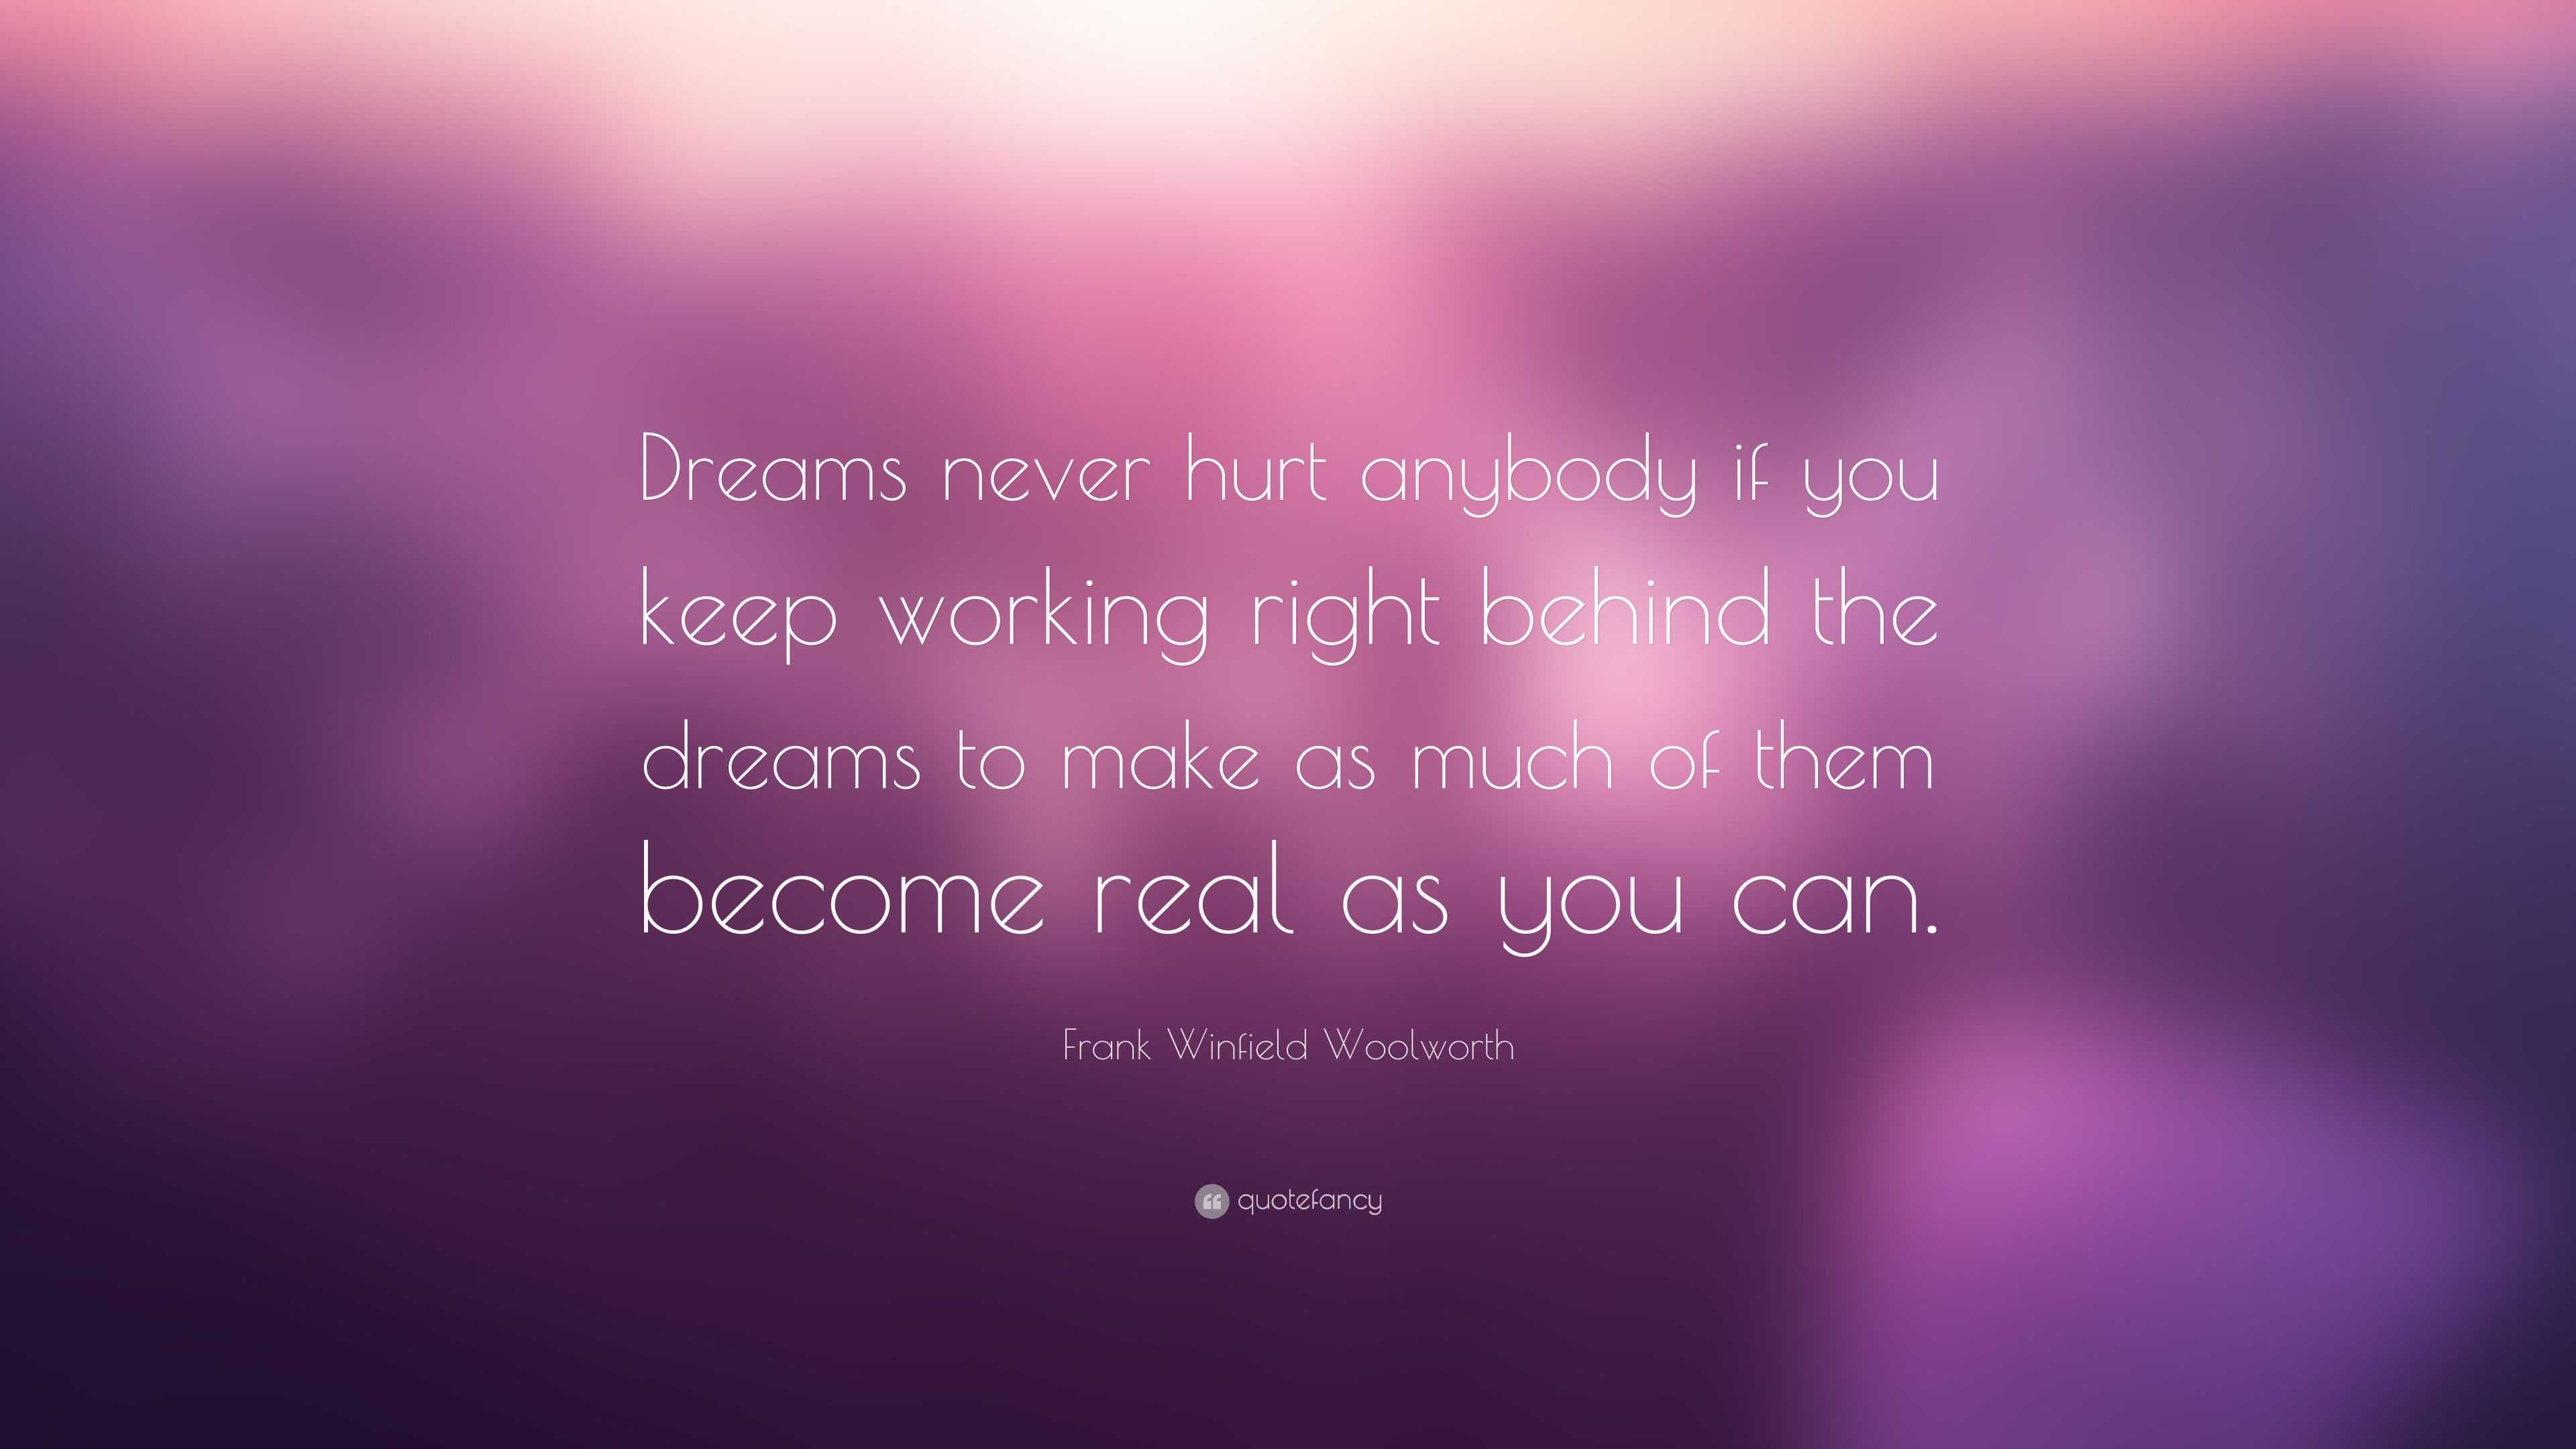 Frank Winfield Woolworth Quote: “Dreams never hurt anybody if you keep ...